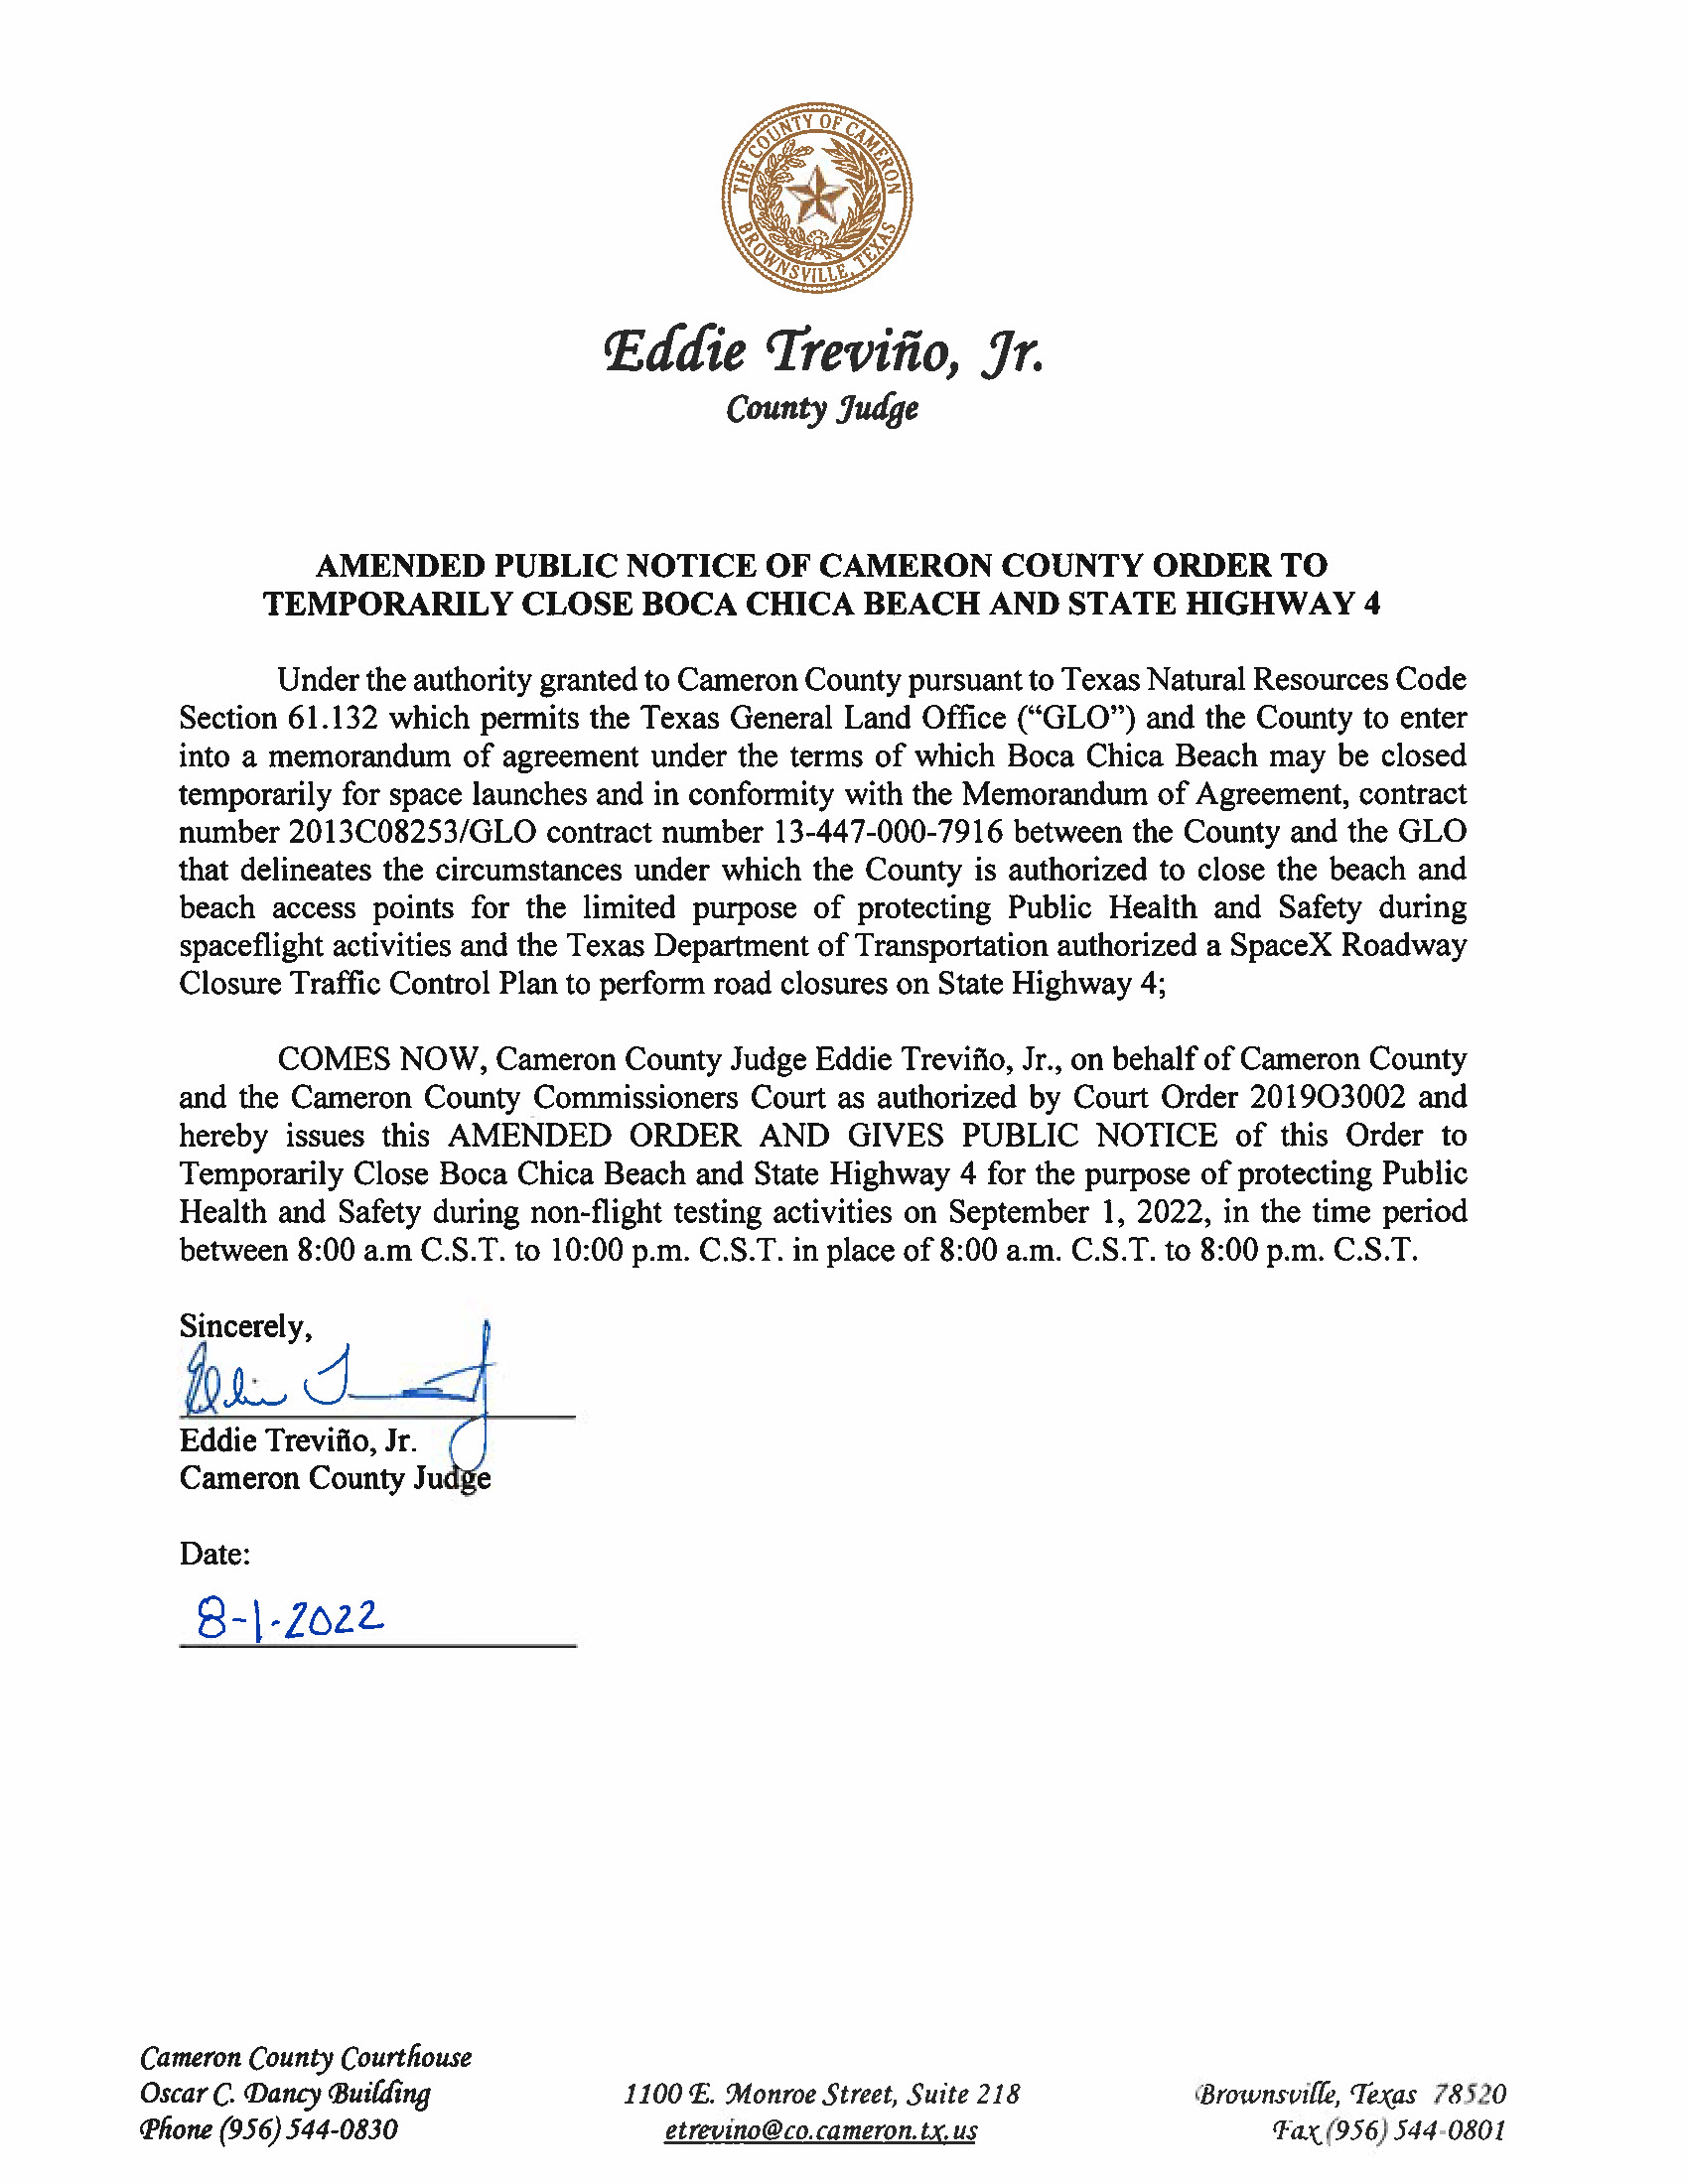 AMENDMENT PUBLIC NOTICE OF CAMERON COUNTY ORDER TO TEMP. BEACH CLOSURE AND HWY.09.01.2022